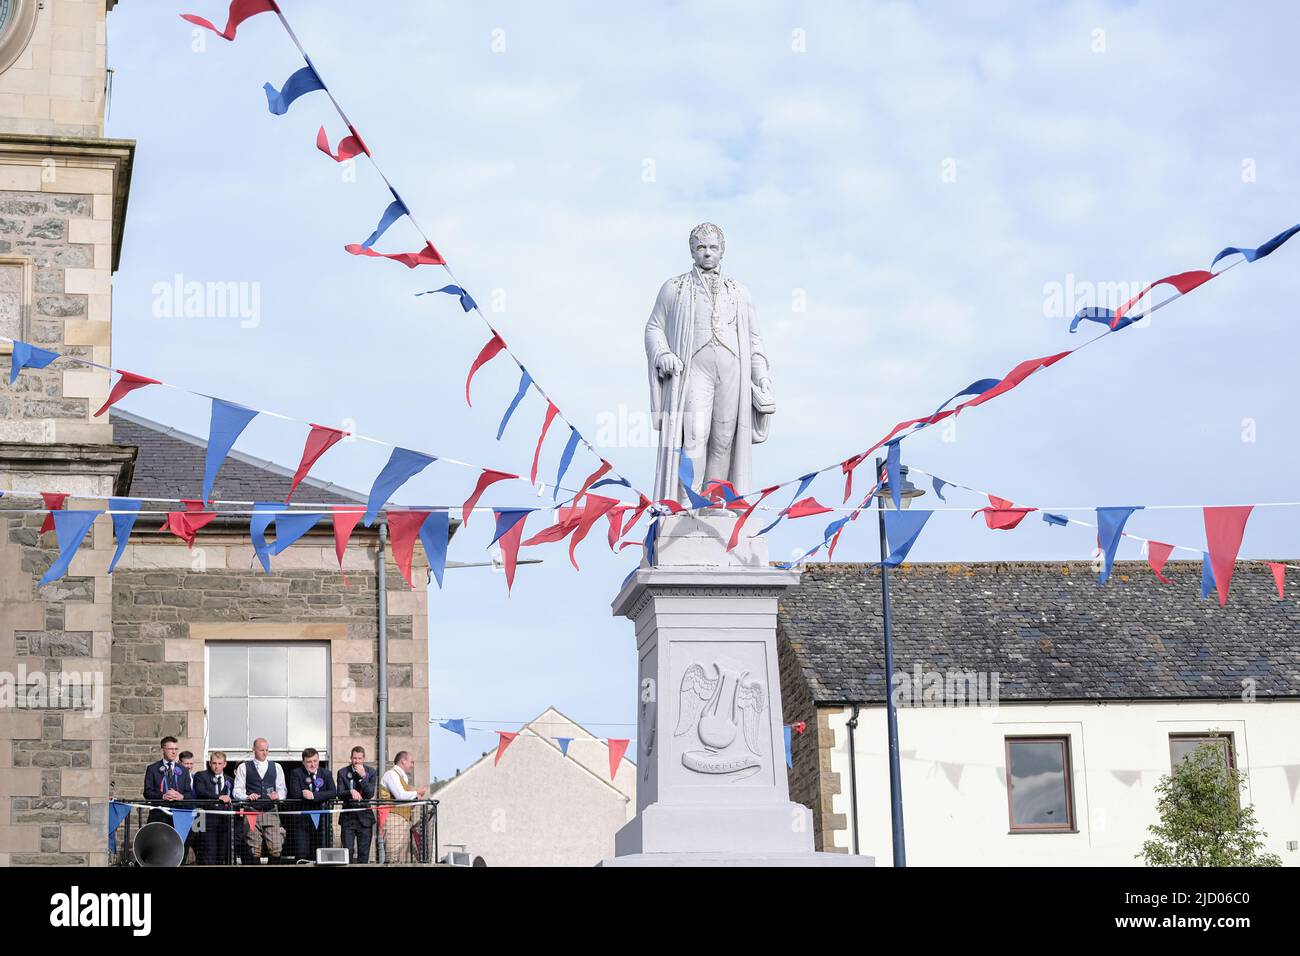 Selkirk, UK. 16.Jun.2022. Selkirk Common Riding 2022. Thursday, The Night afore the Morn. RBSB Nichol and his attendants look on from the Town Hall as Senior Burgh Officer, Mr Graeme Bell led by the Flute band, preambles the streets starting in the West Port, at 1830hrs, stopping at significant junctions while walking a circuit of the Market Place, High Street, Back Row, Kirk Wynd for the “Crying of the Burley” and then onwards to the Victoria Halls, for the United Crafts Colour Bussin. At 2000hrs during the proceedings the Selkirk Ex-Royal Burgh Standard Bearers form up in a parade to marc Stock Photo